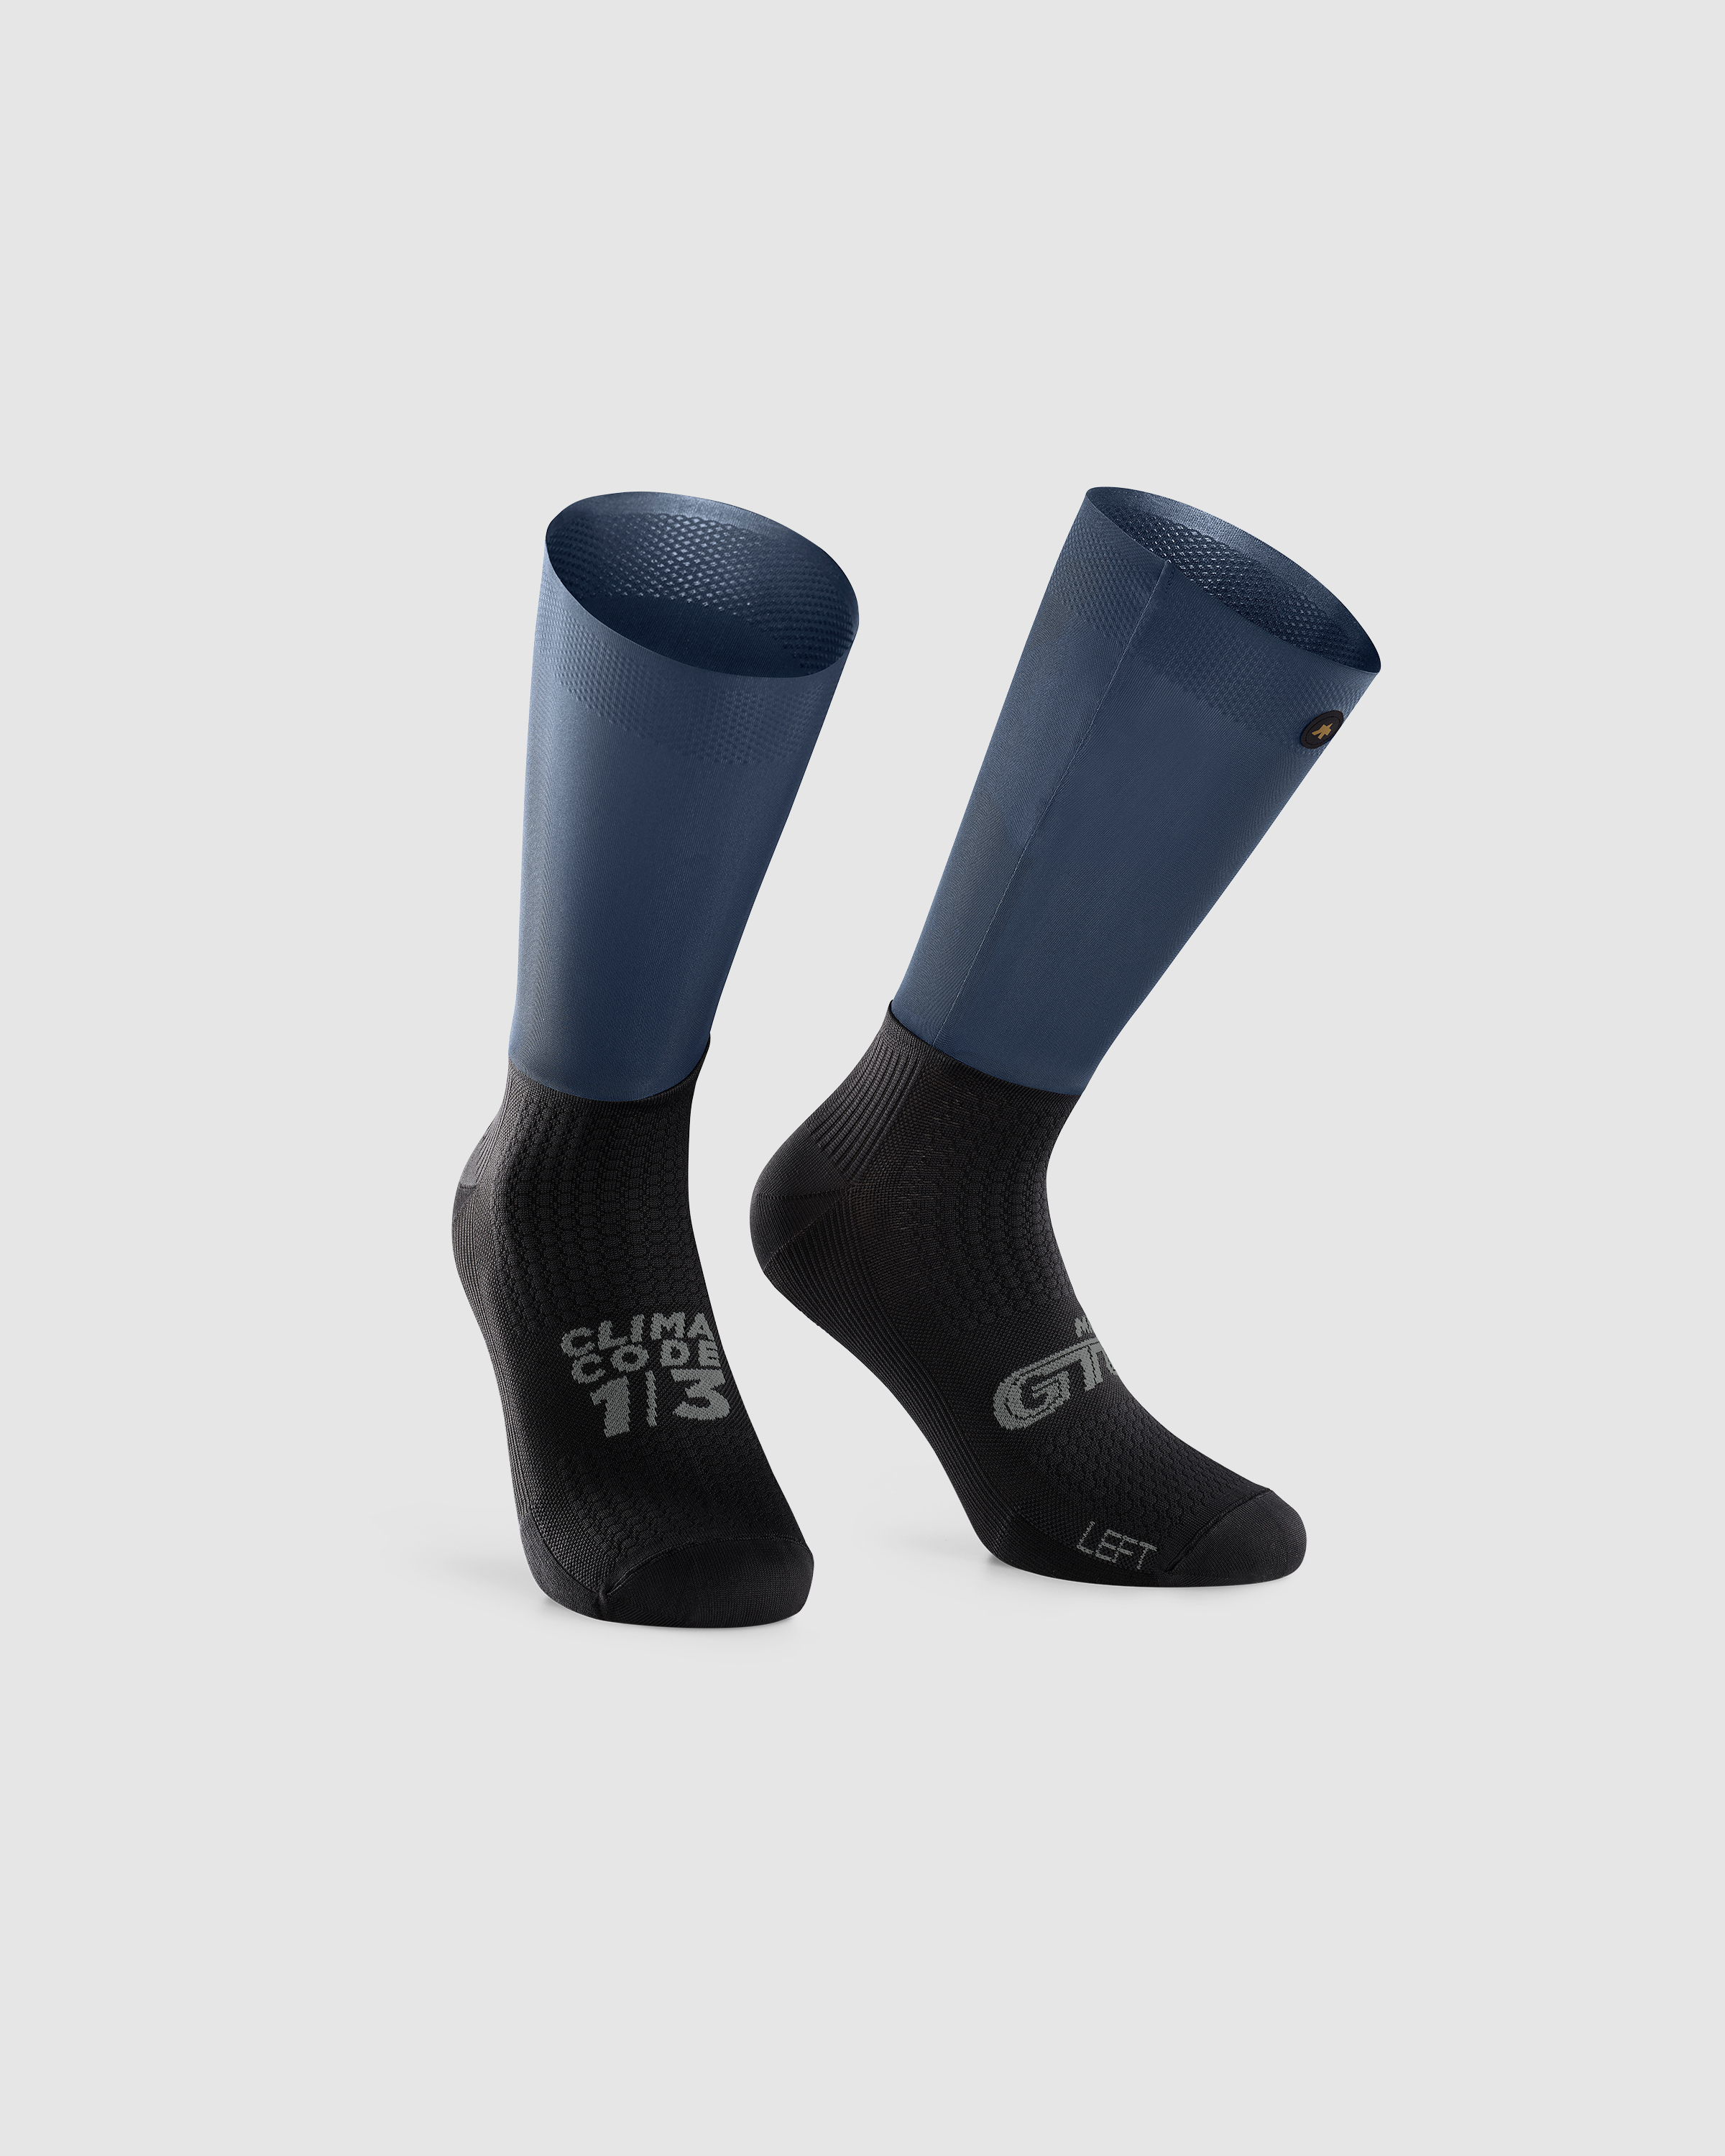 GTO Socks - ASSOS Of Switzerland - Official Outlet